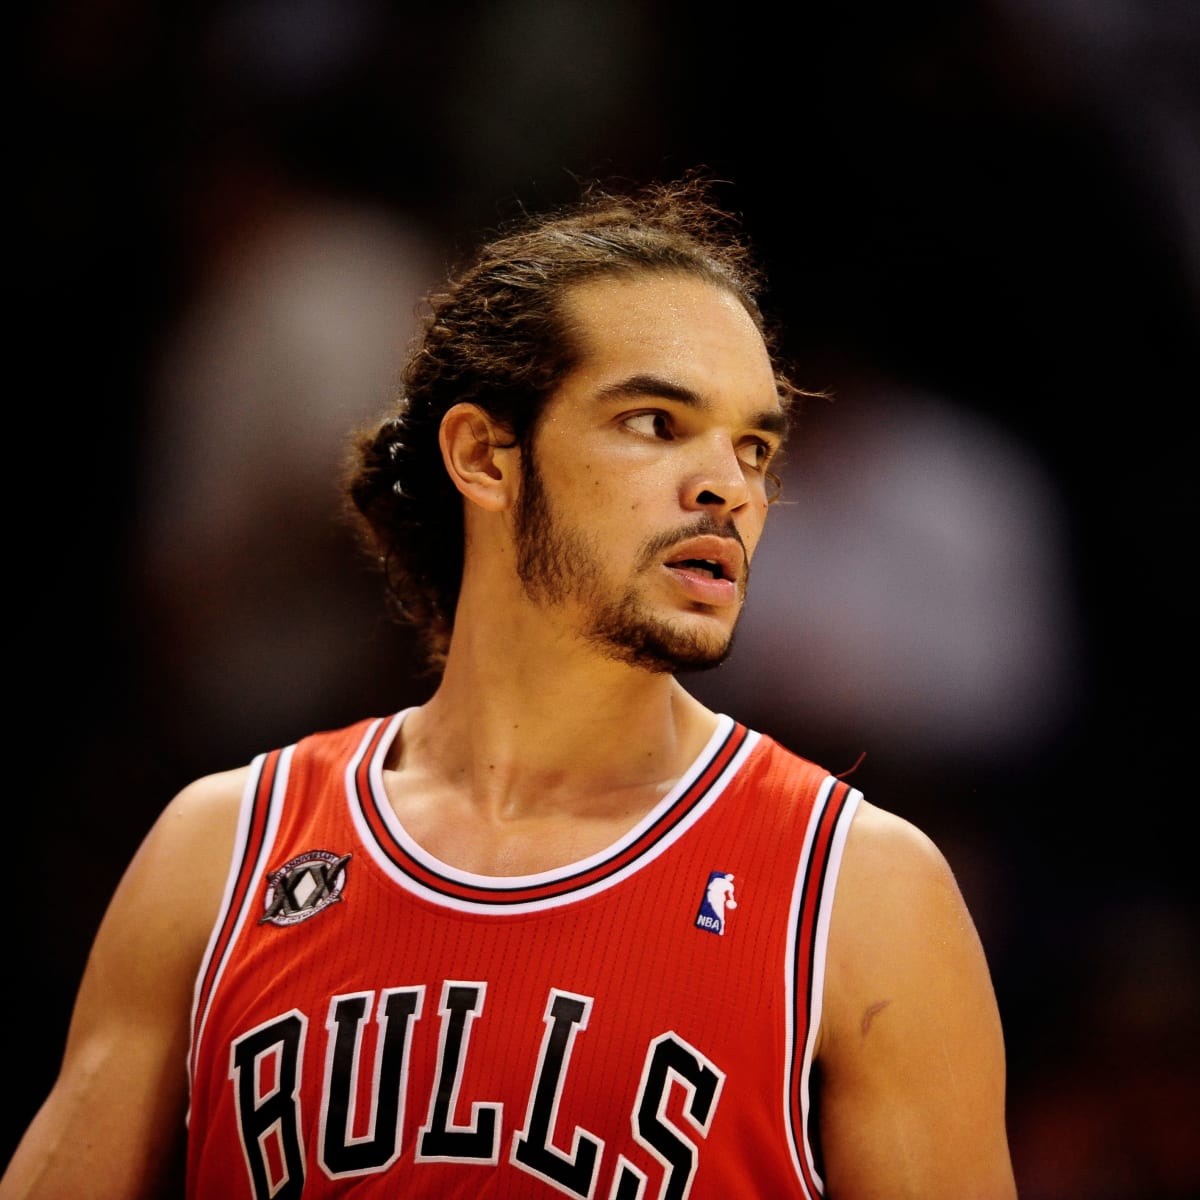 Noah clearly the face of the Bulls right now